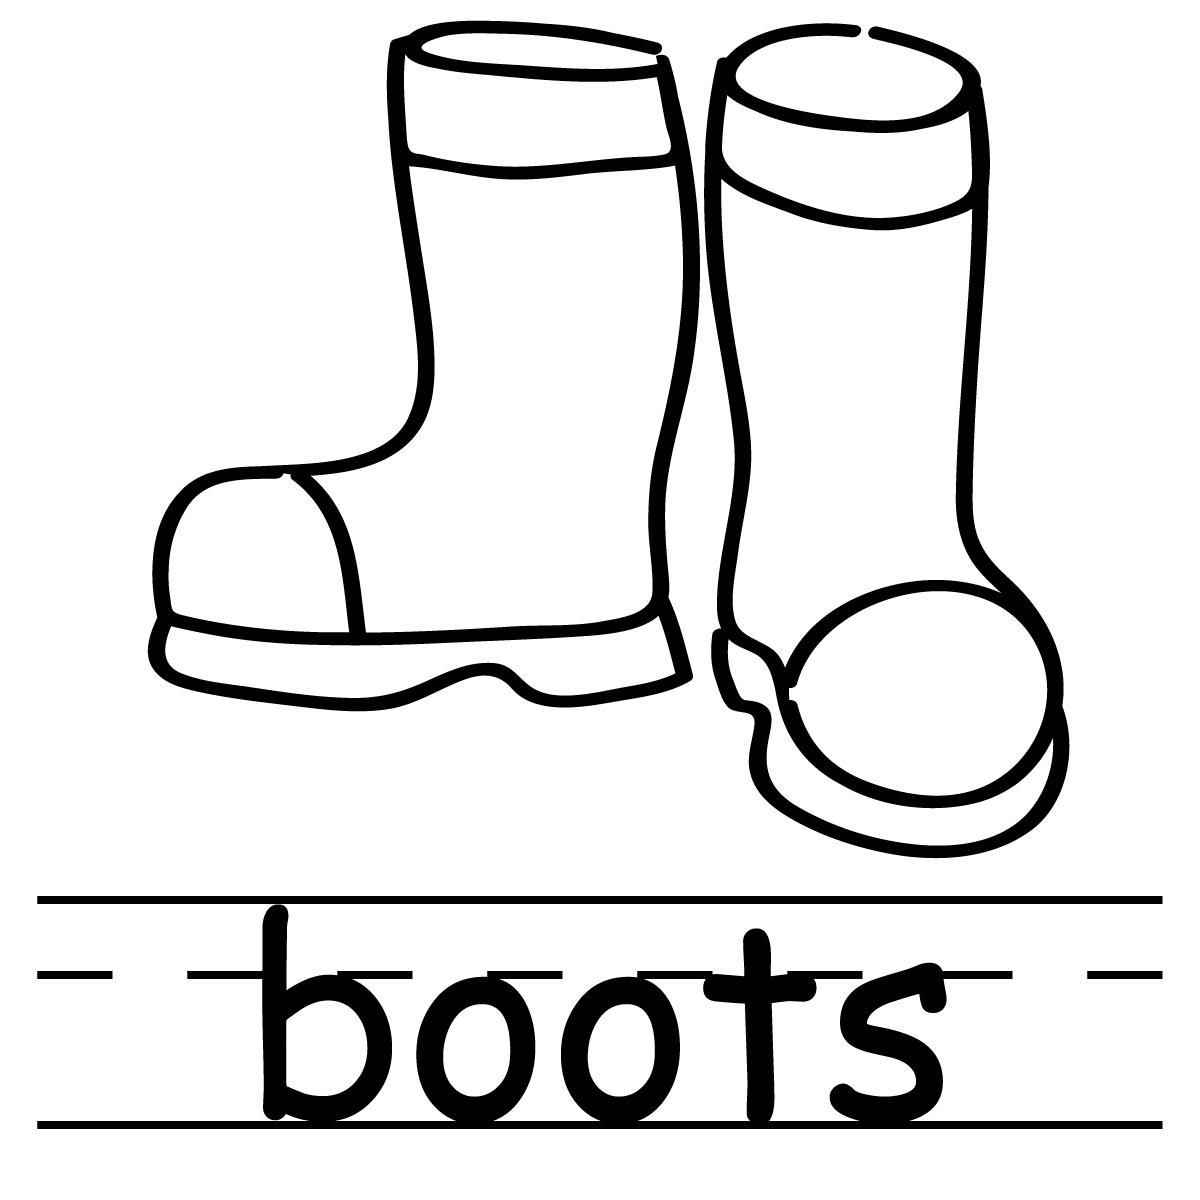 boots clipart black and white